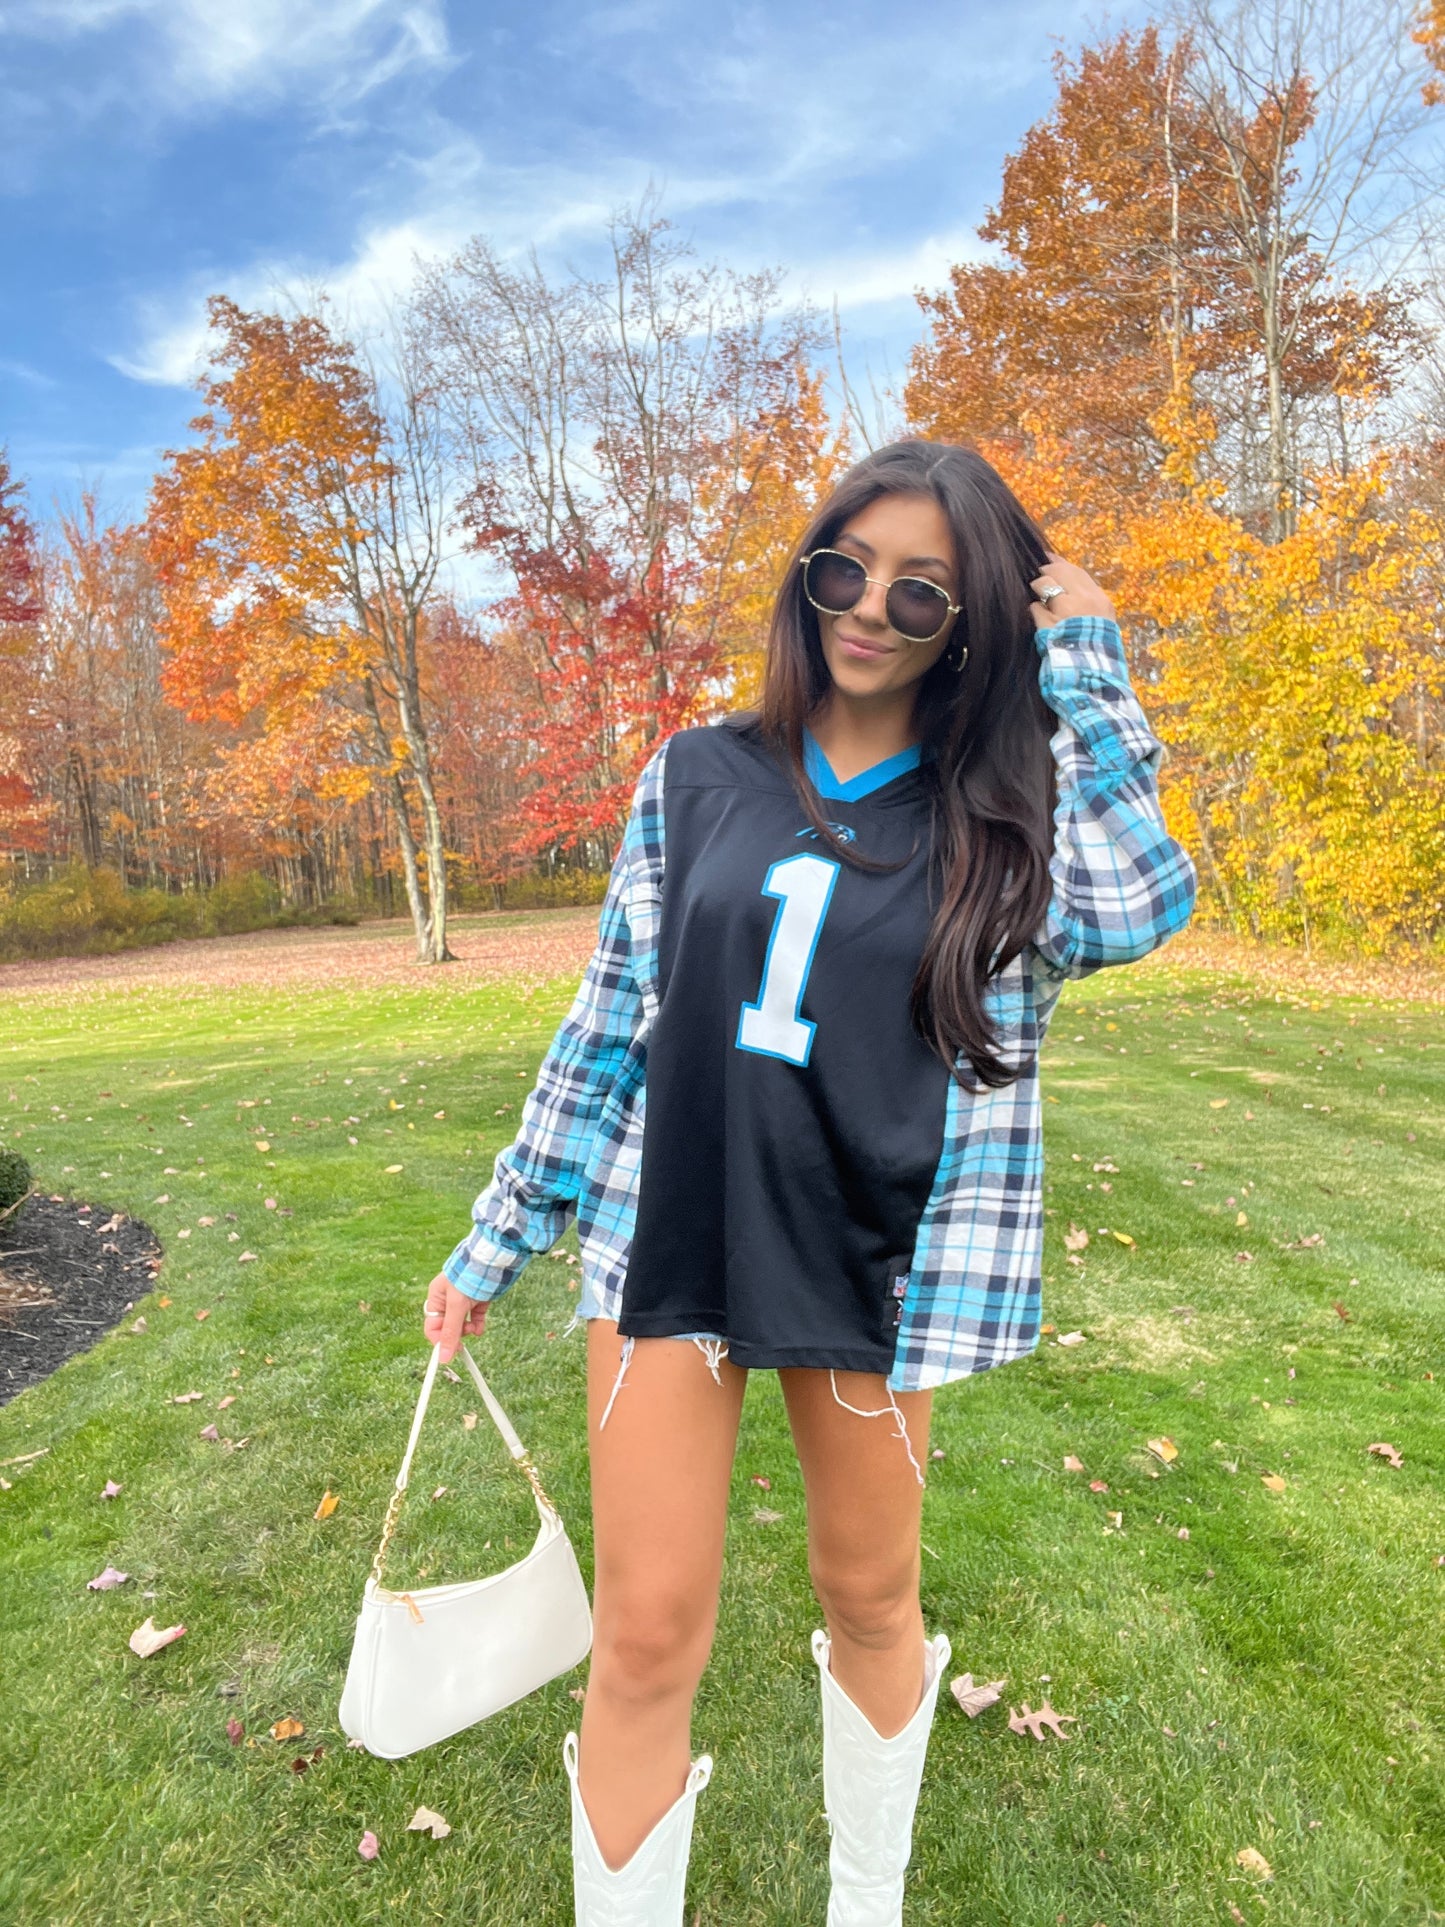 #1 NEWTON PANTHERS JERSEY X FLANNEL